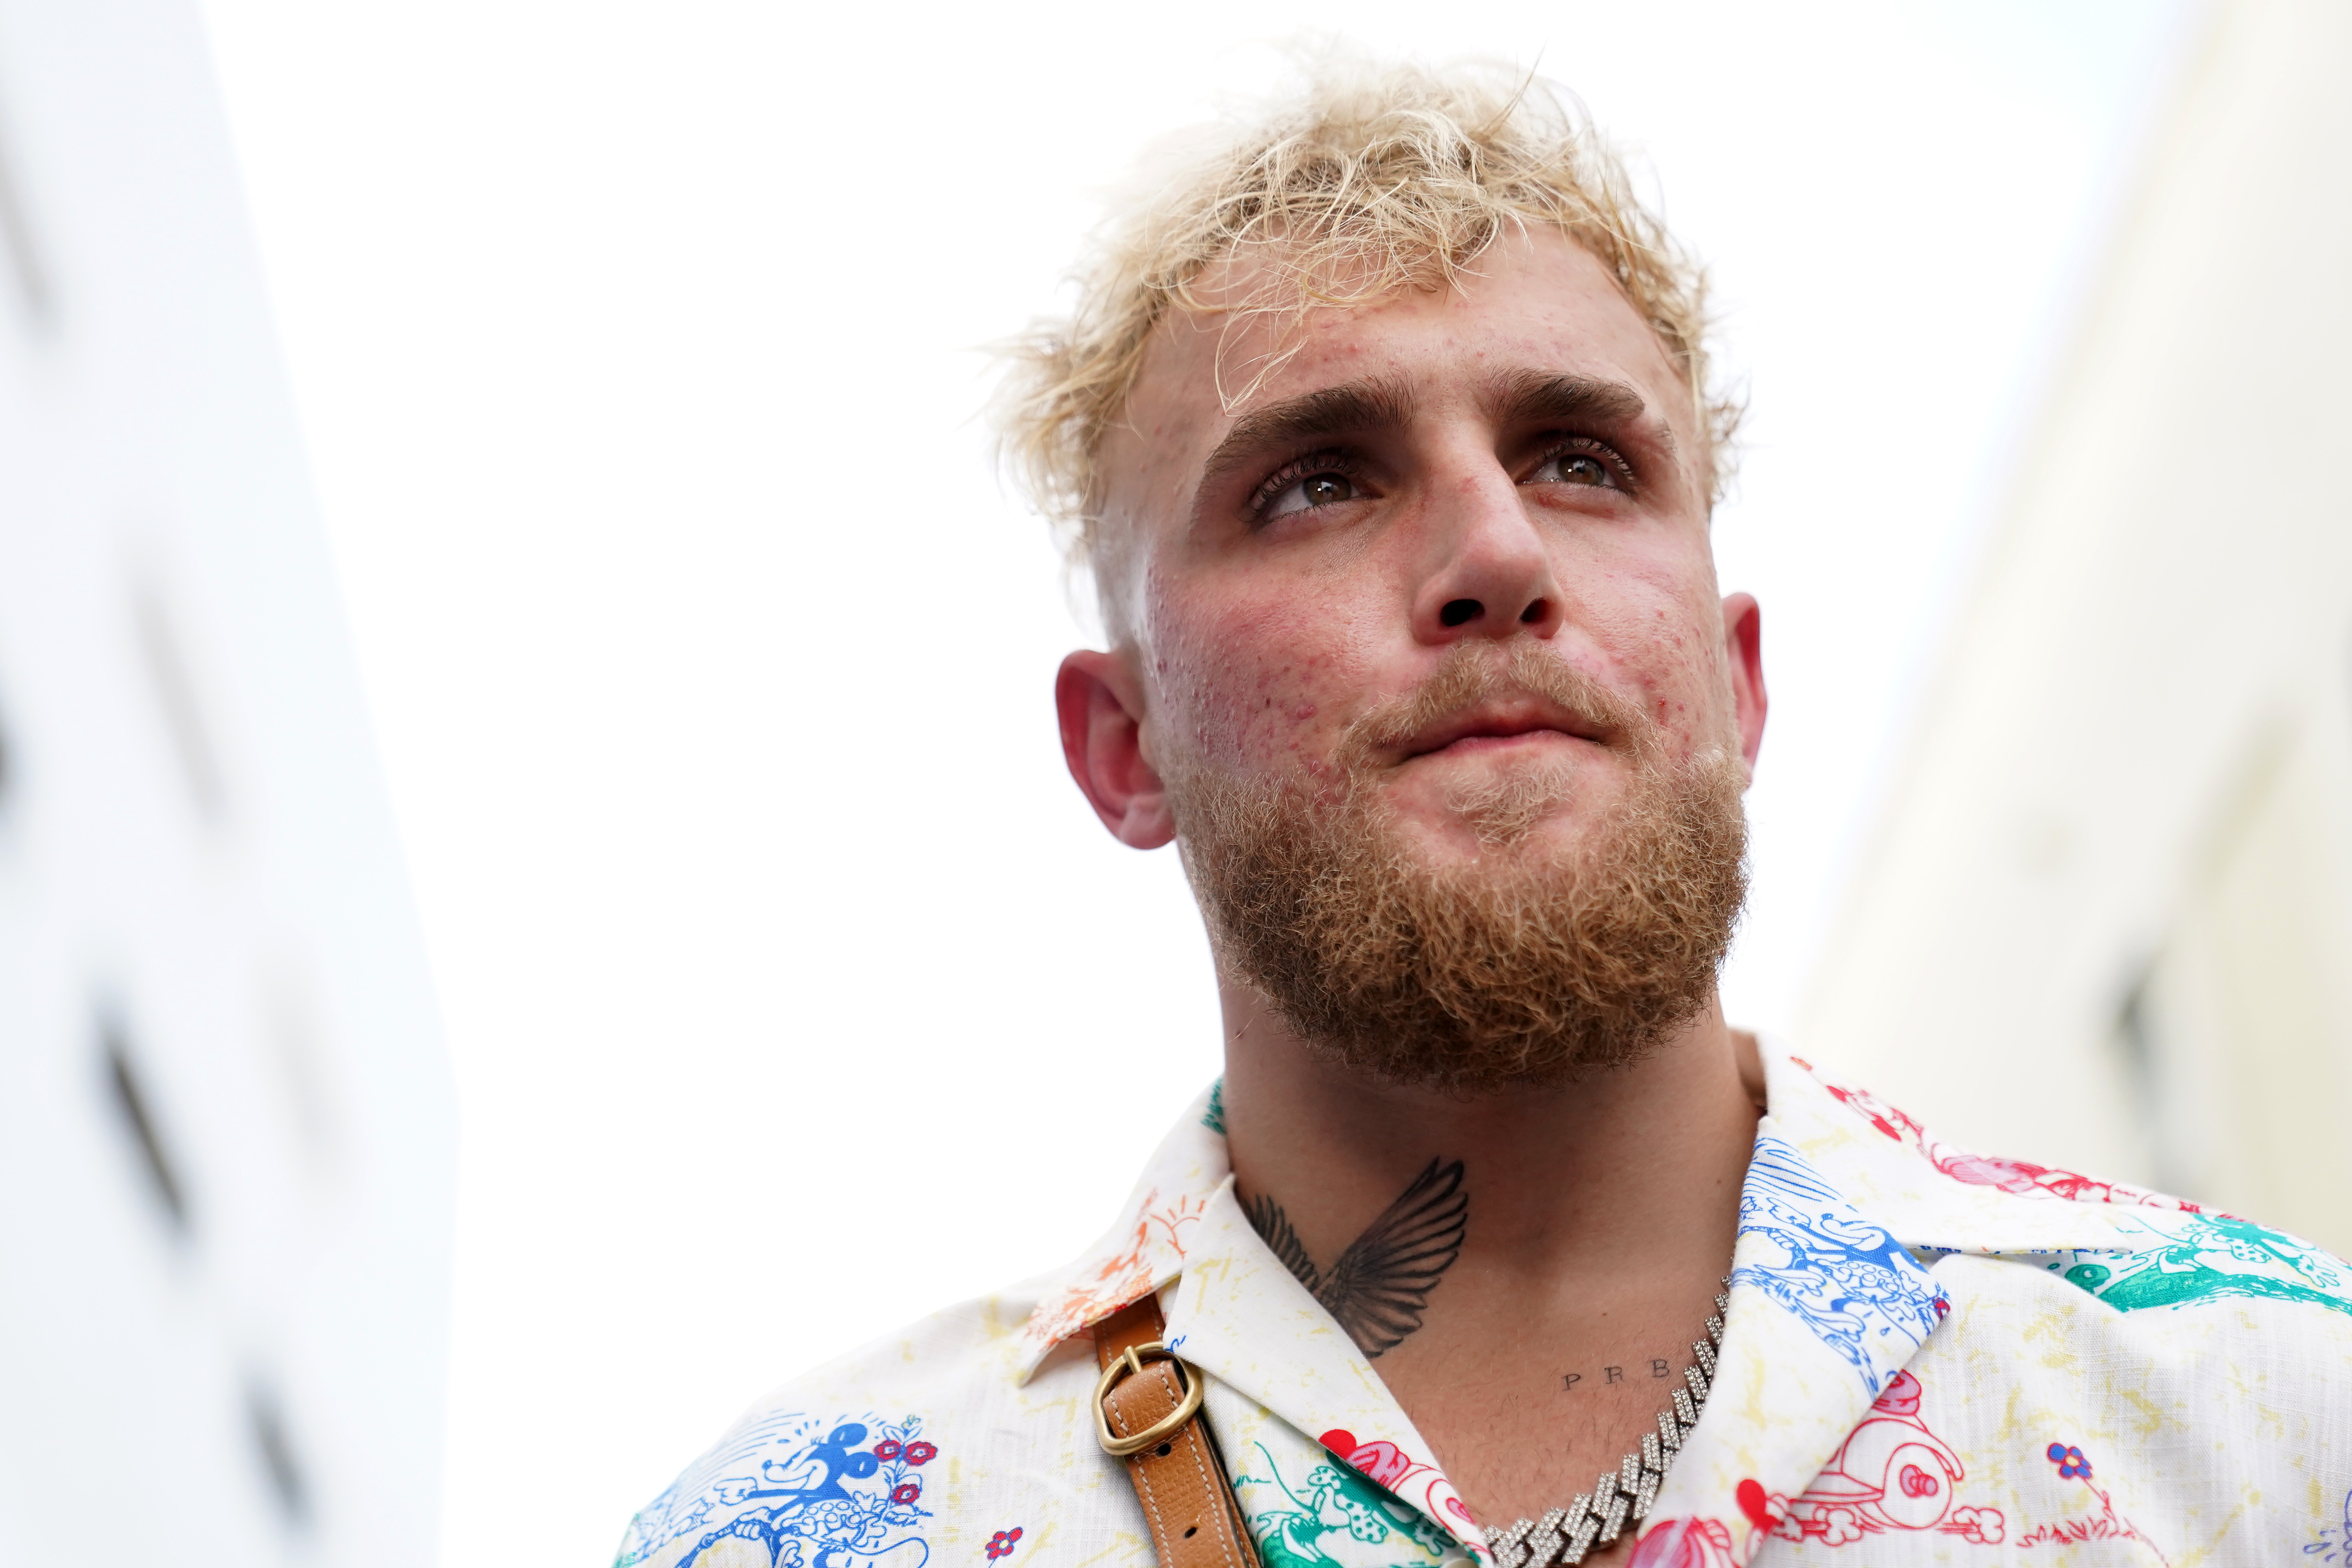 Jake Paul is now a promoter, will he do more than help himself?